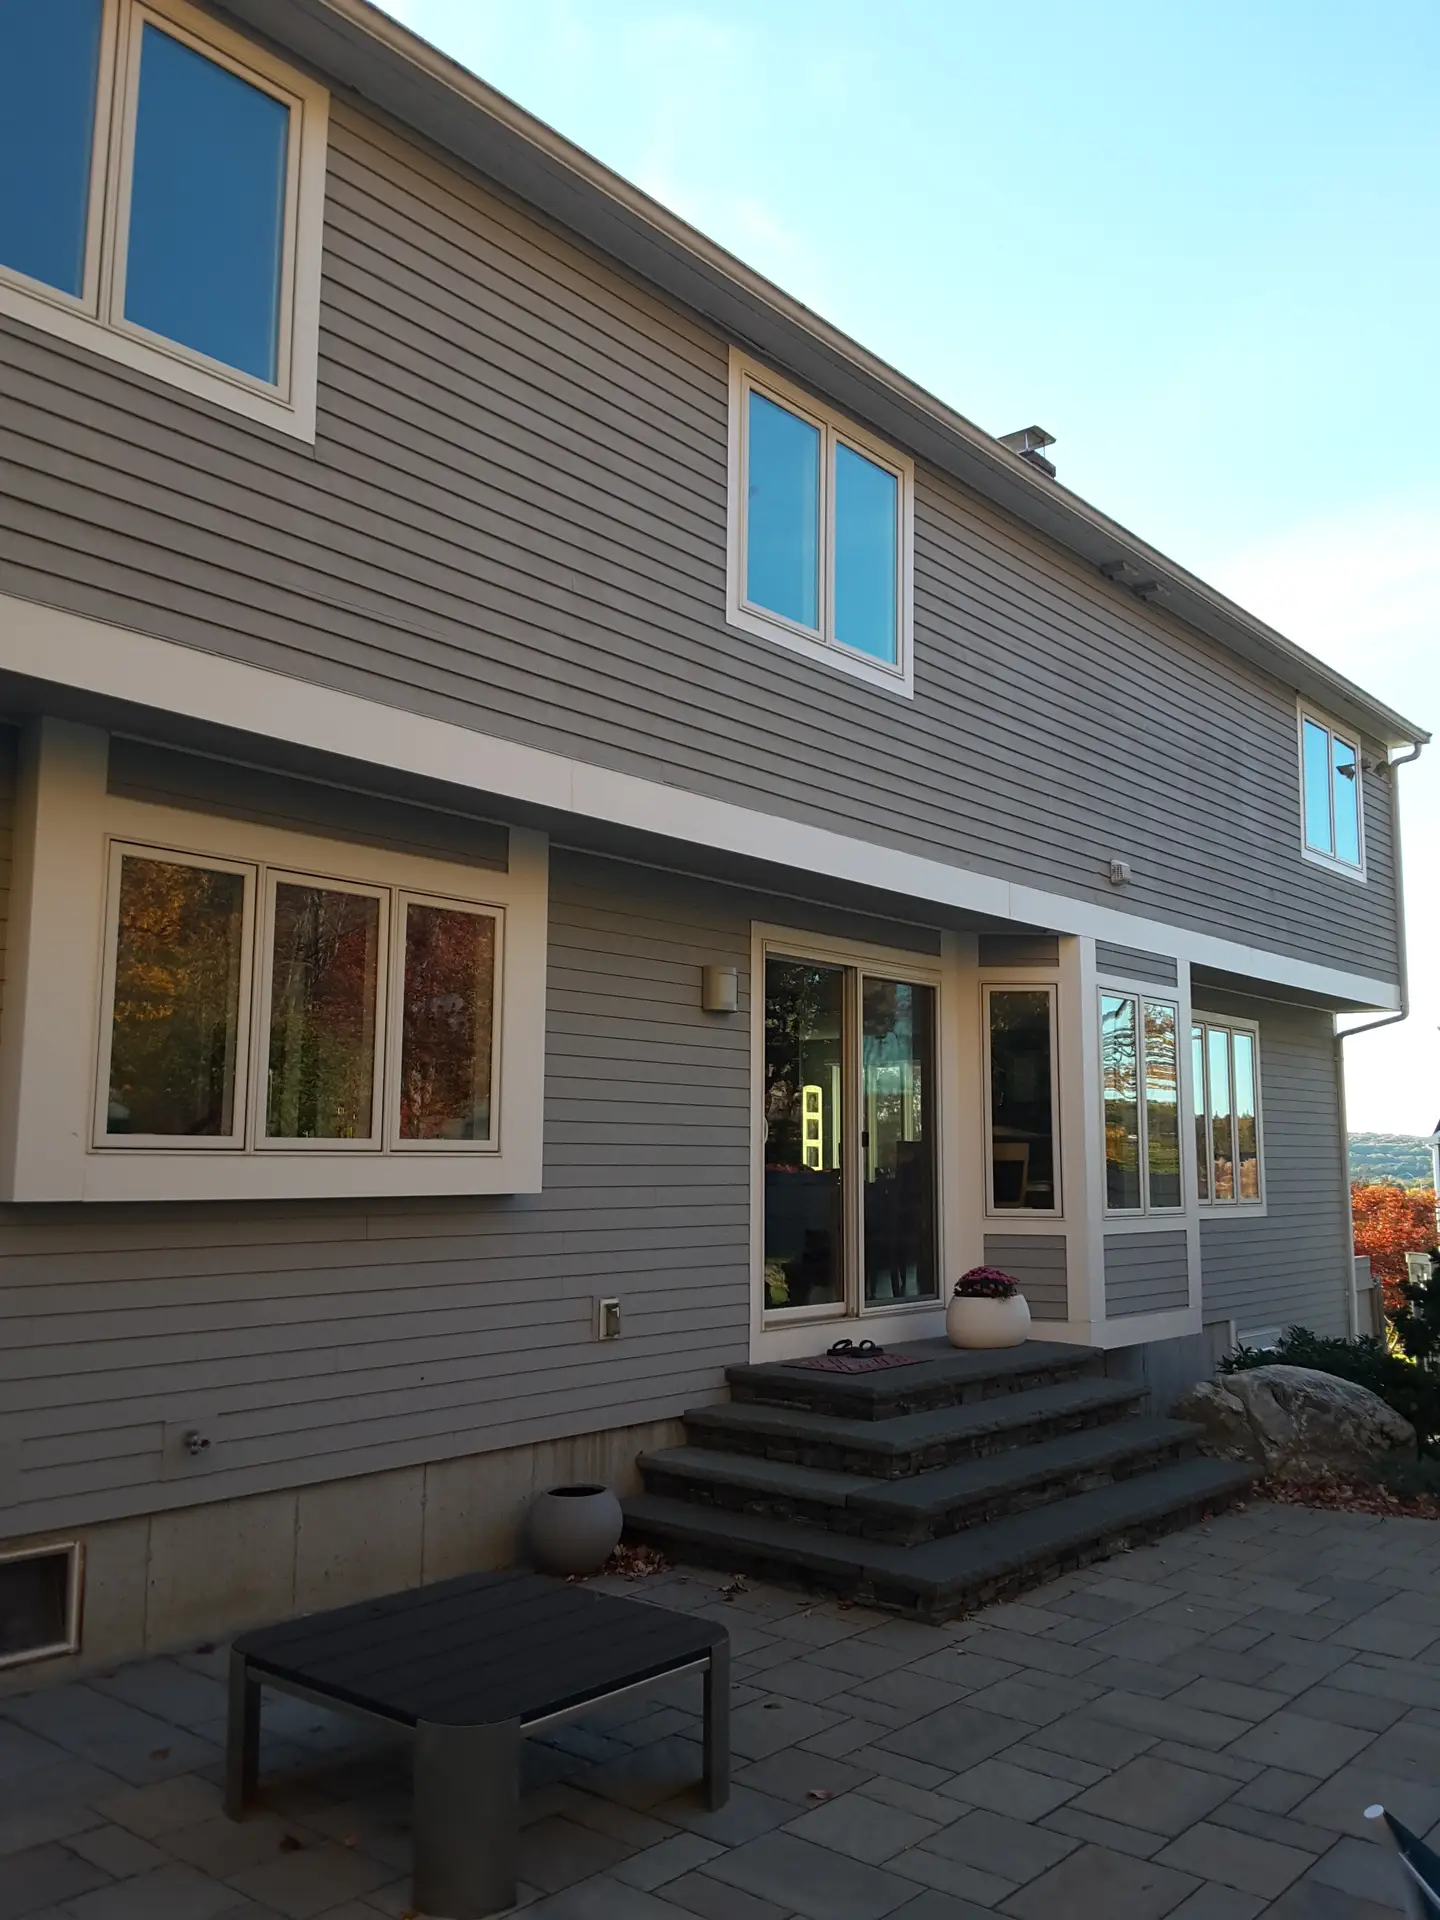 Choose Solid State Construction, Andover's preferred James Hardie Siding contractor, for quality installation and exceptional customer care. Call us today!